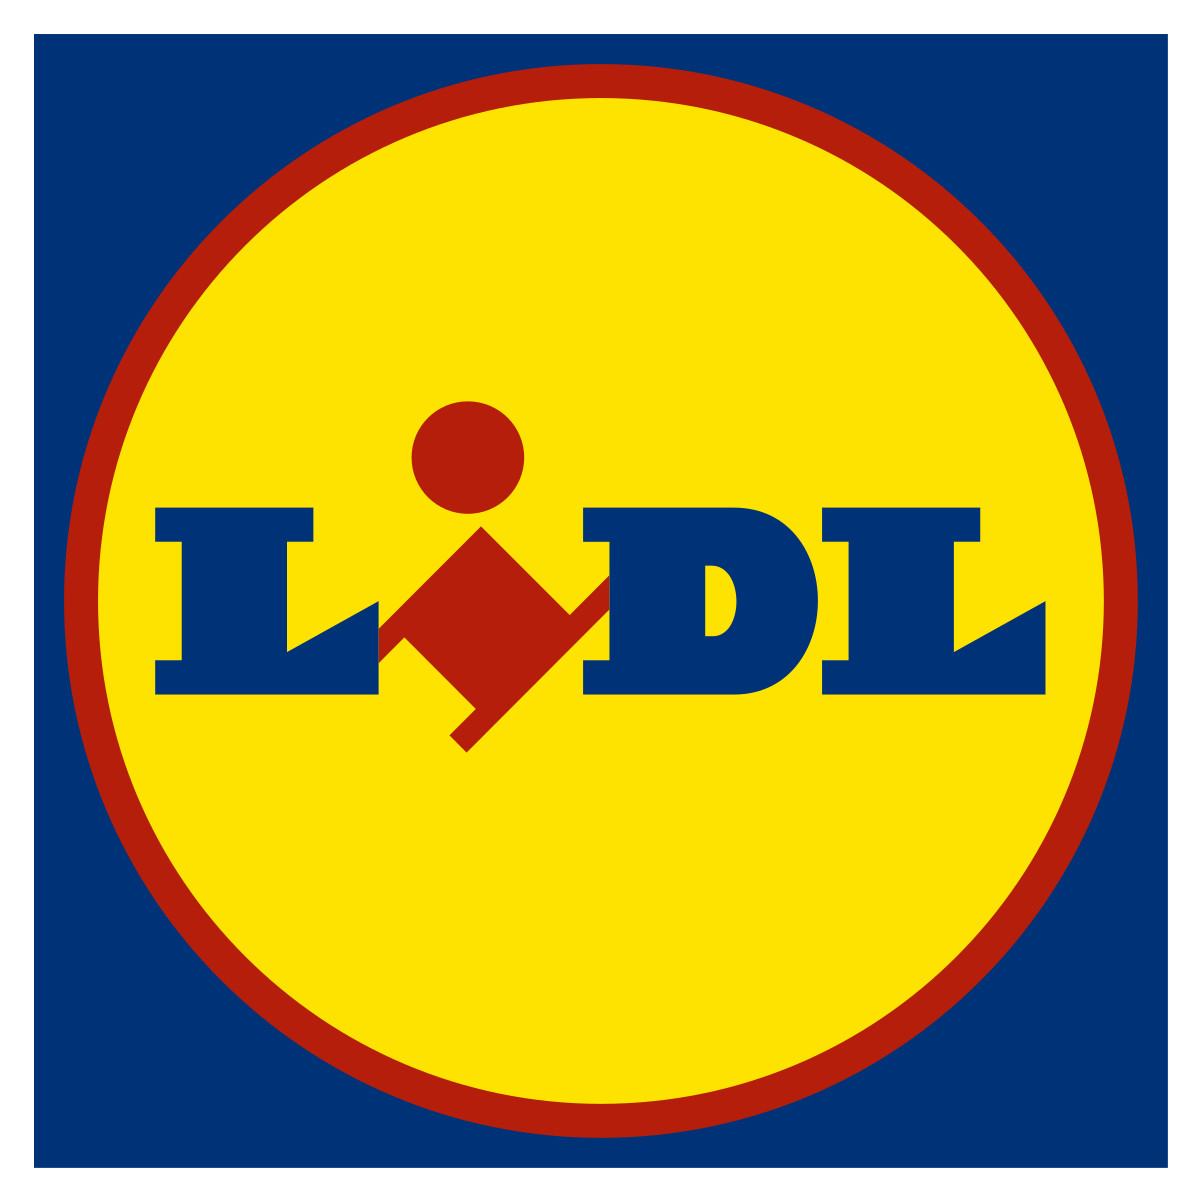 lidl.png.